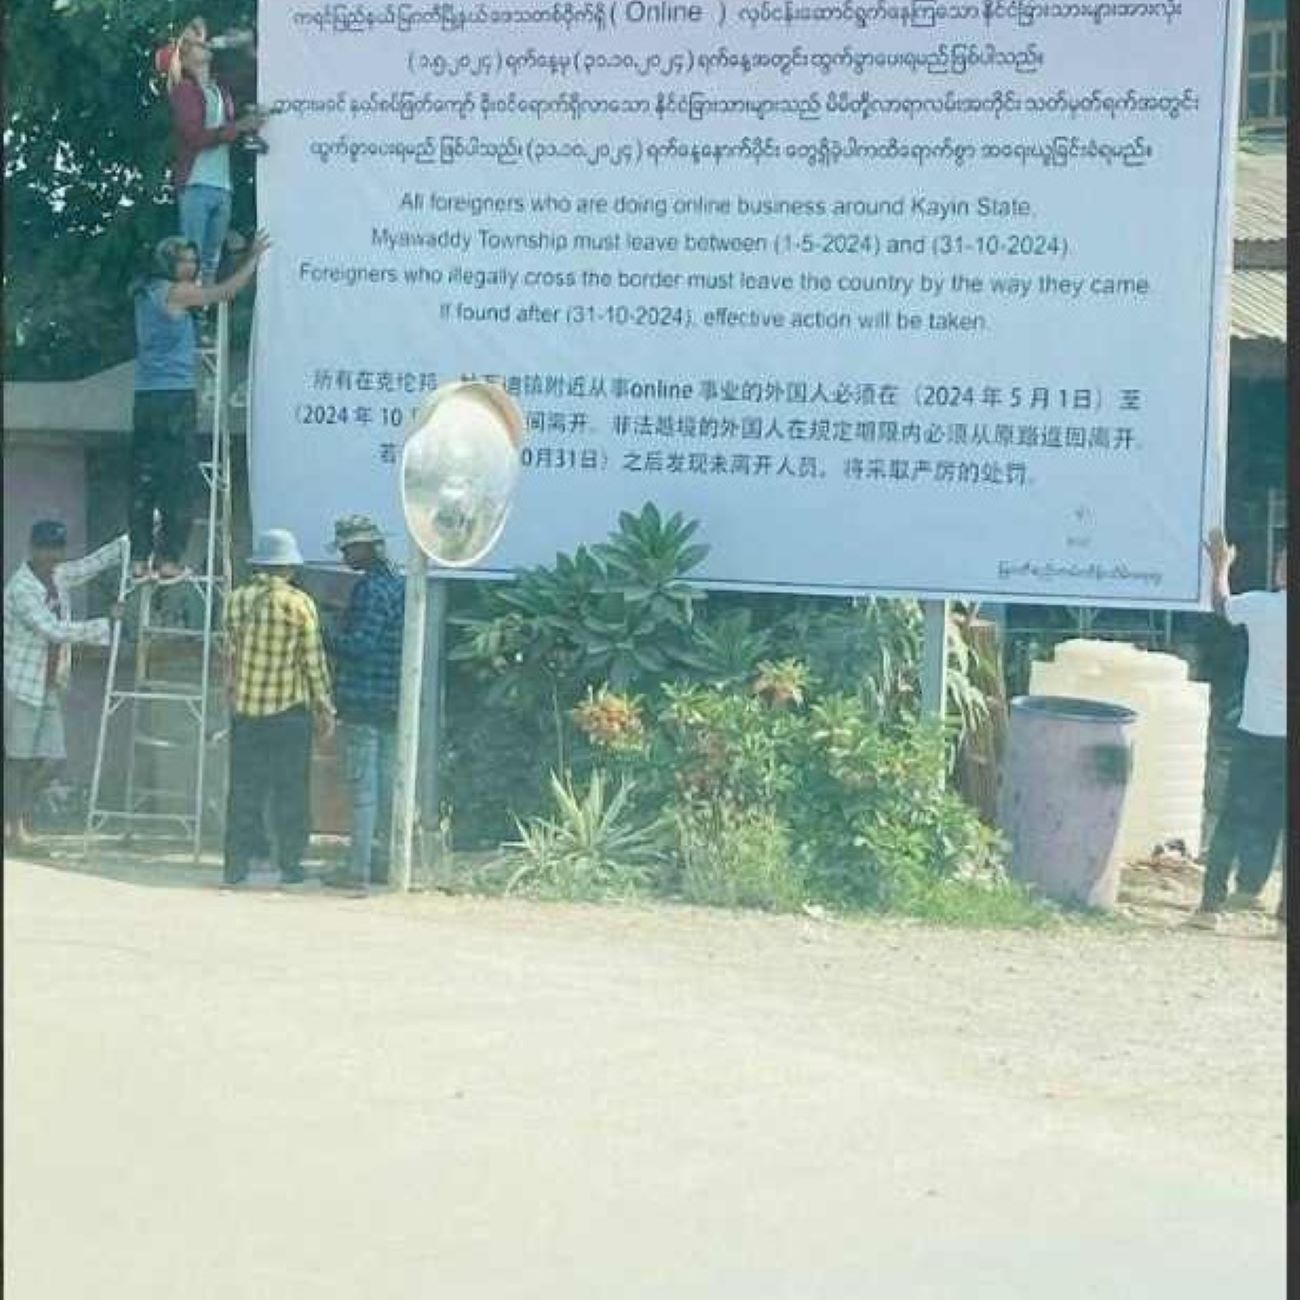 KNA/BGF orders those who do telecom scamming (Zhapian) businesses to leave Myawaddy Township